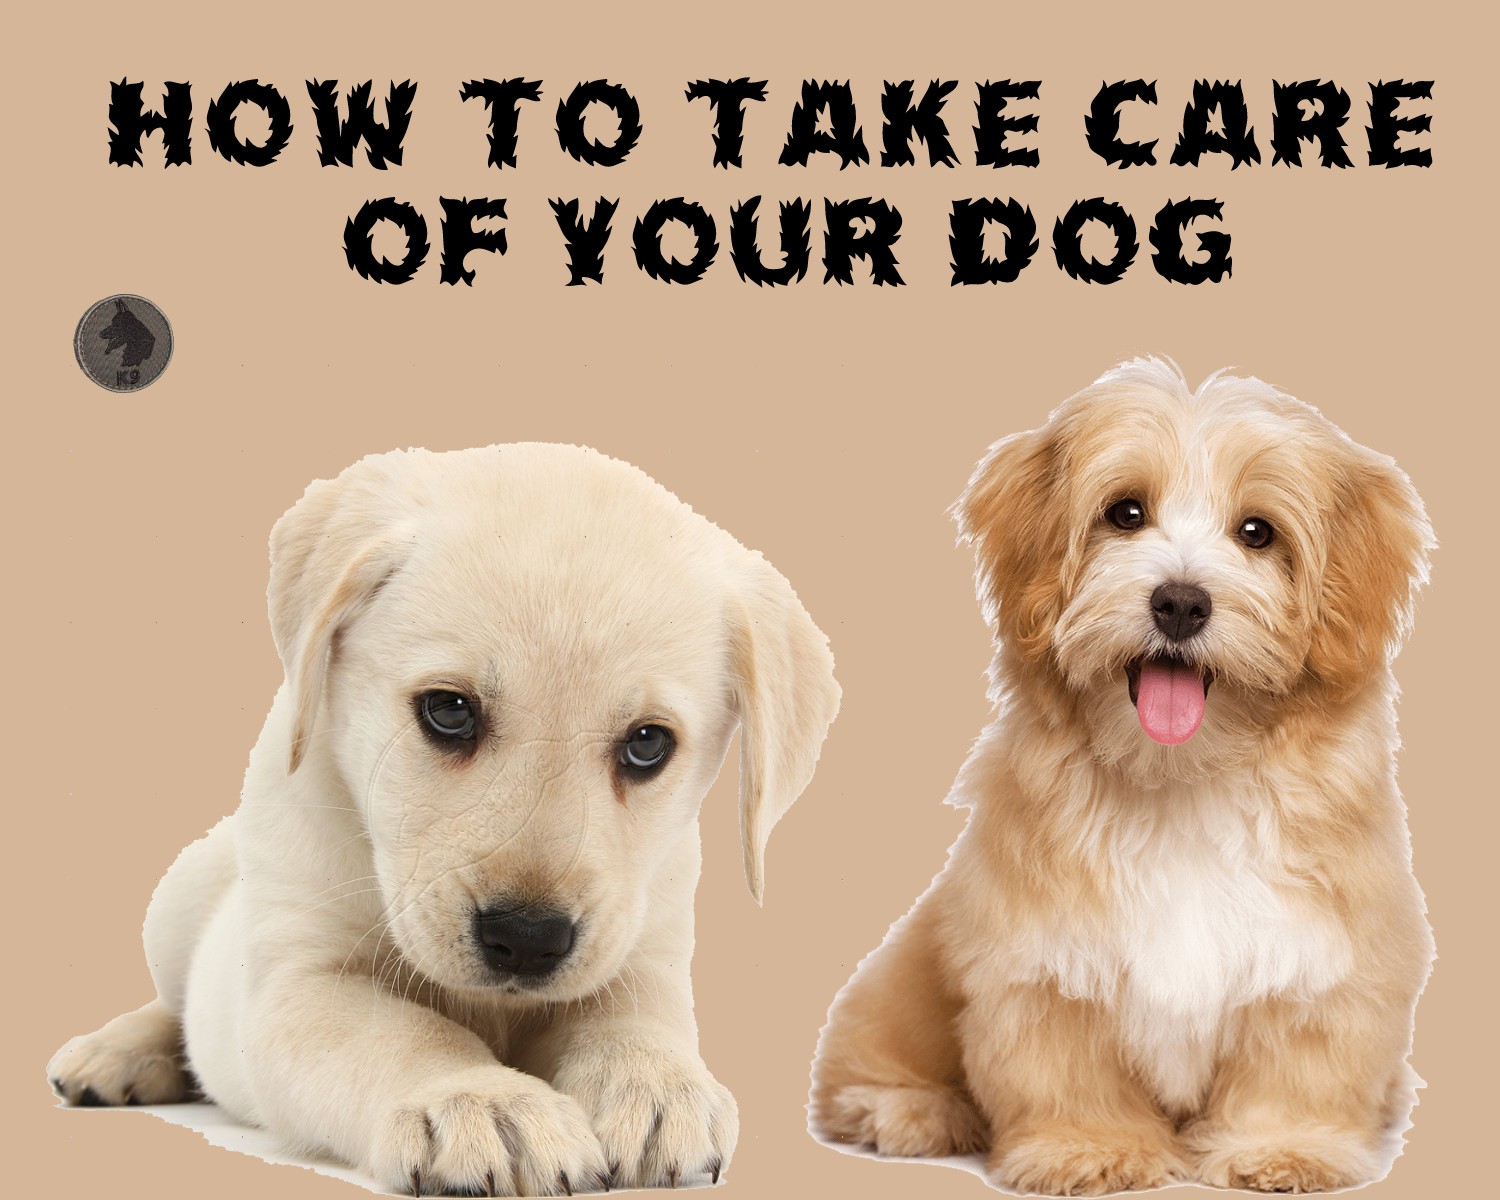 How to take care of your dog